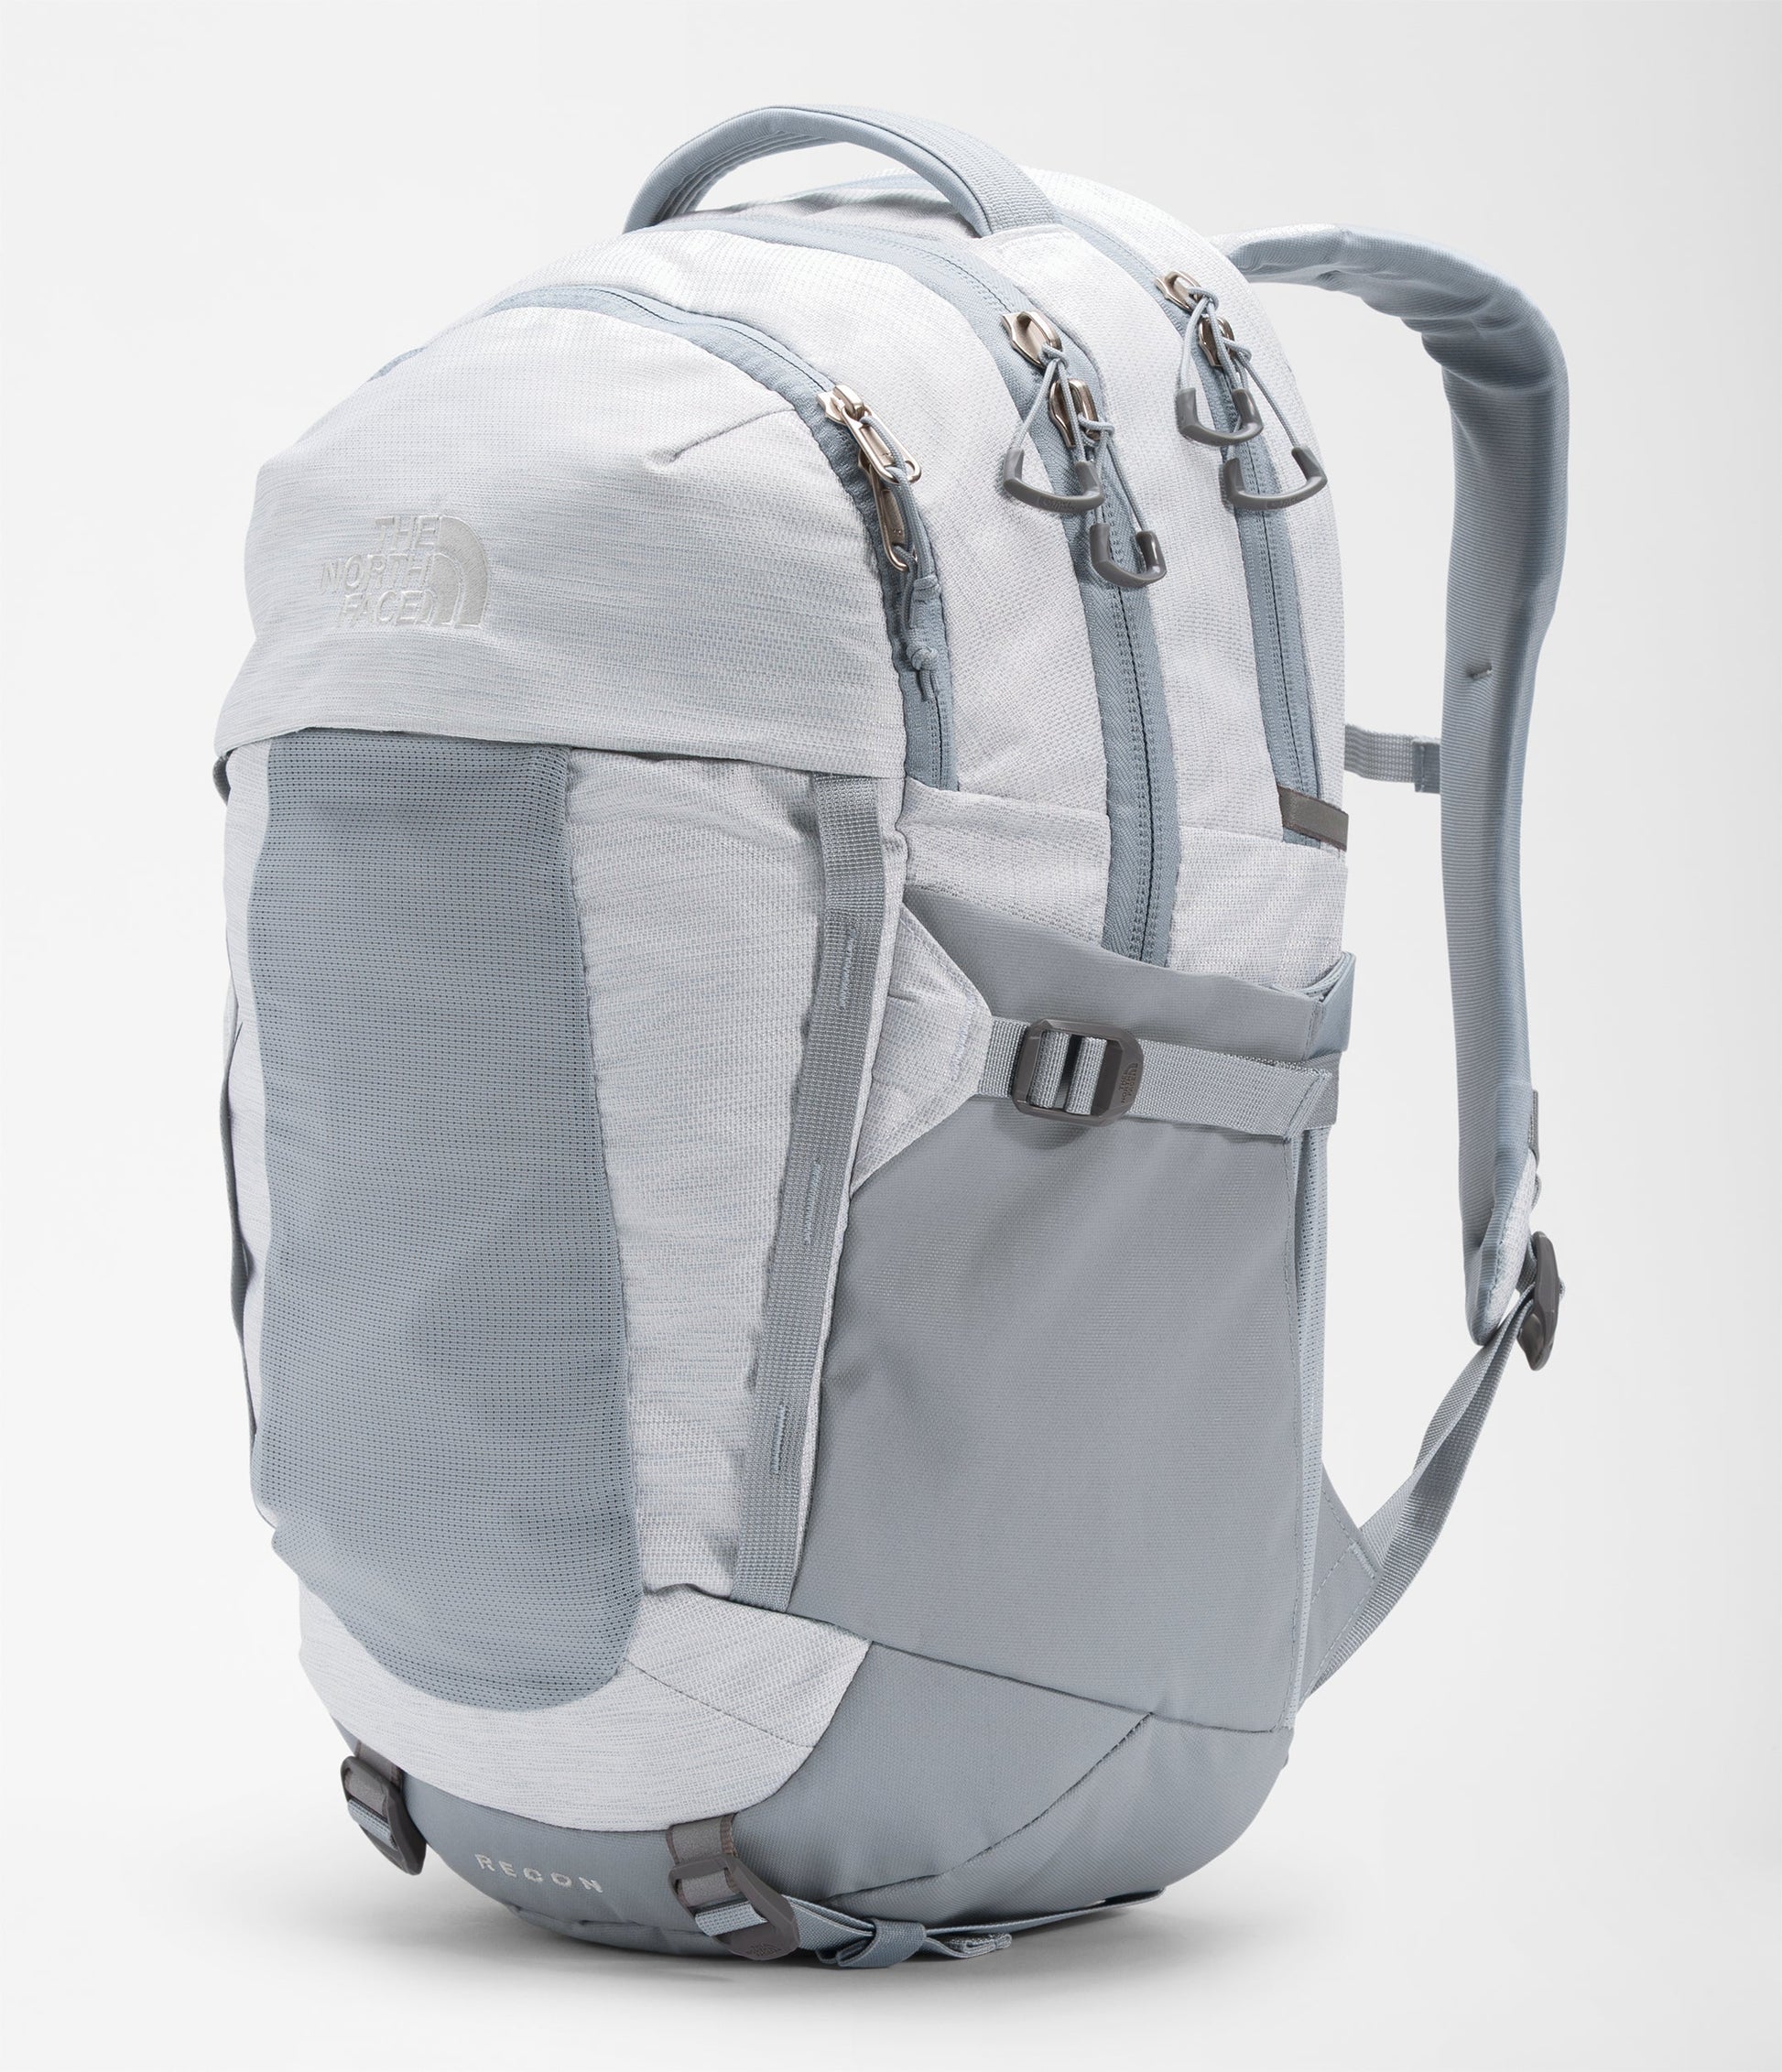 The North Face Women's Recon Backpack - TNF White Metallic Melange/Mid Grey